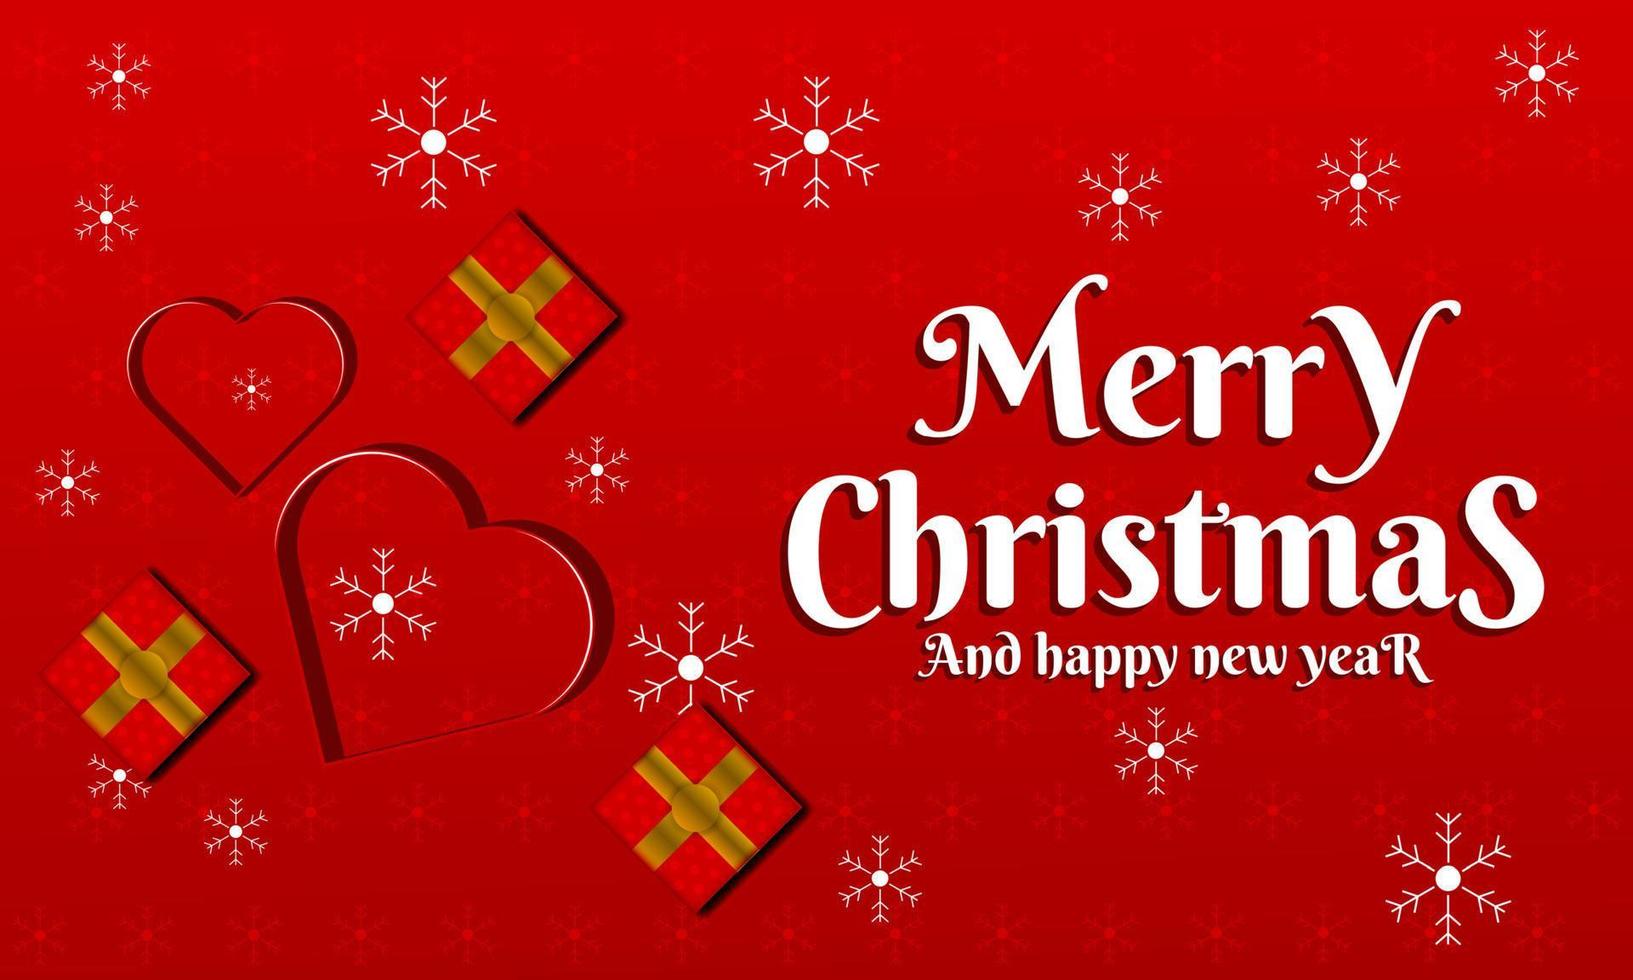 Merry Christmas Background, Design a happy new year greeting card and merry christmas in winter vector